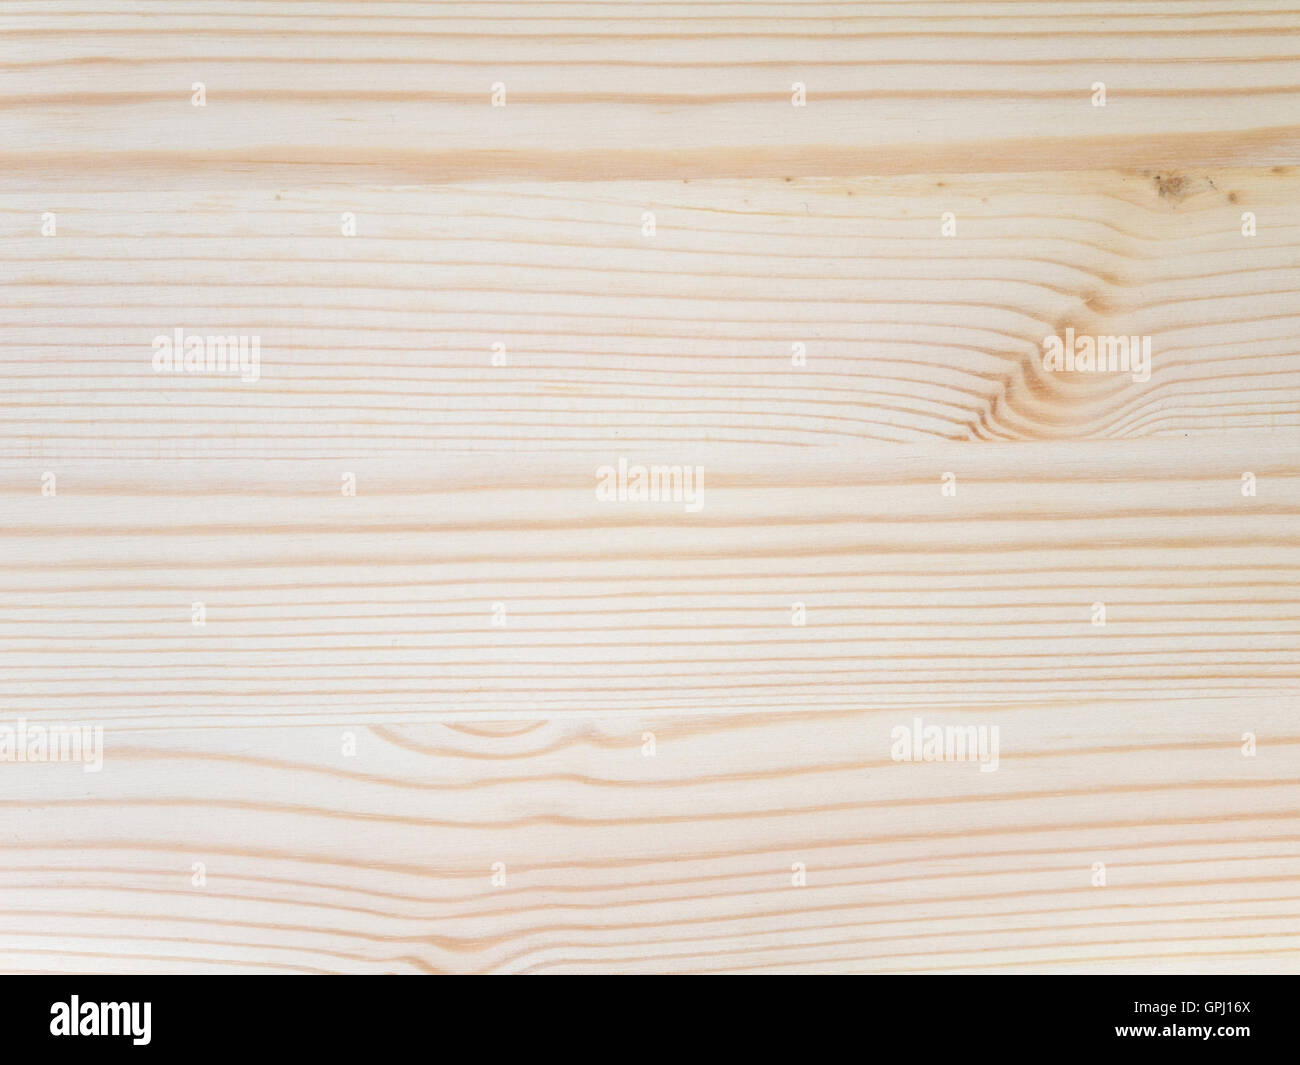 Natural light textured wooden wall with knots Stock Photo